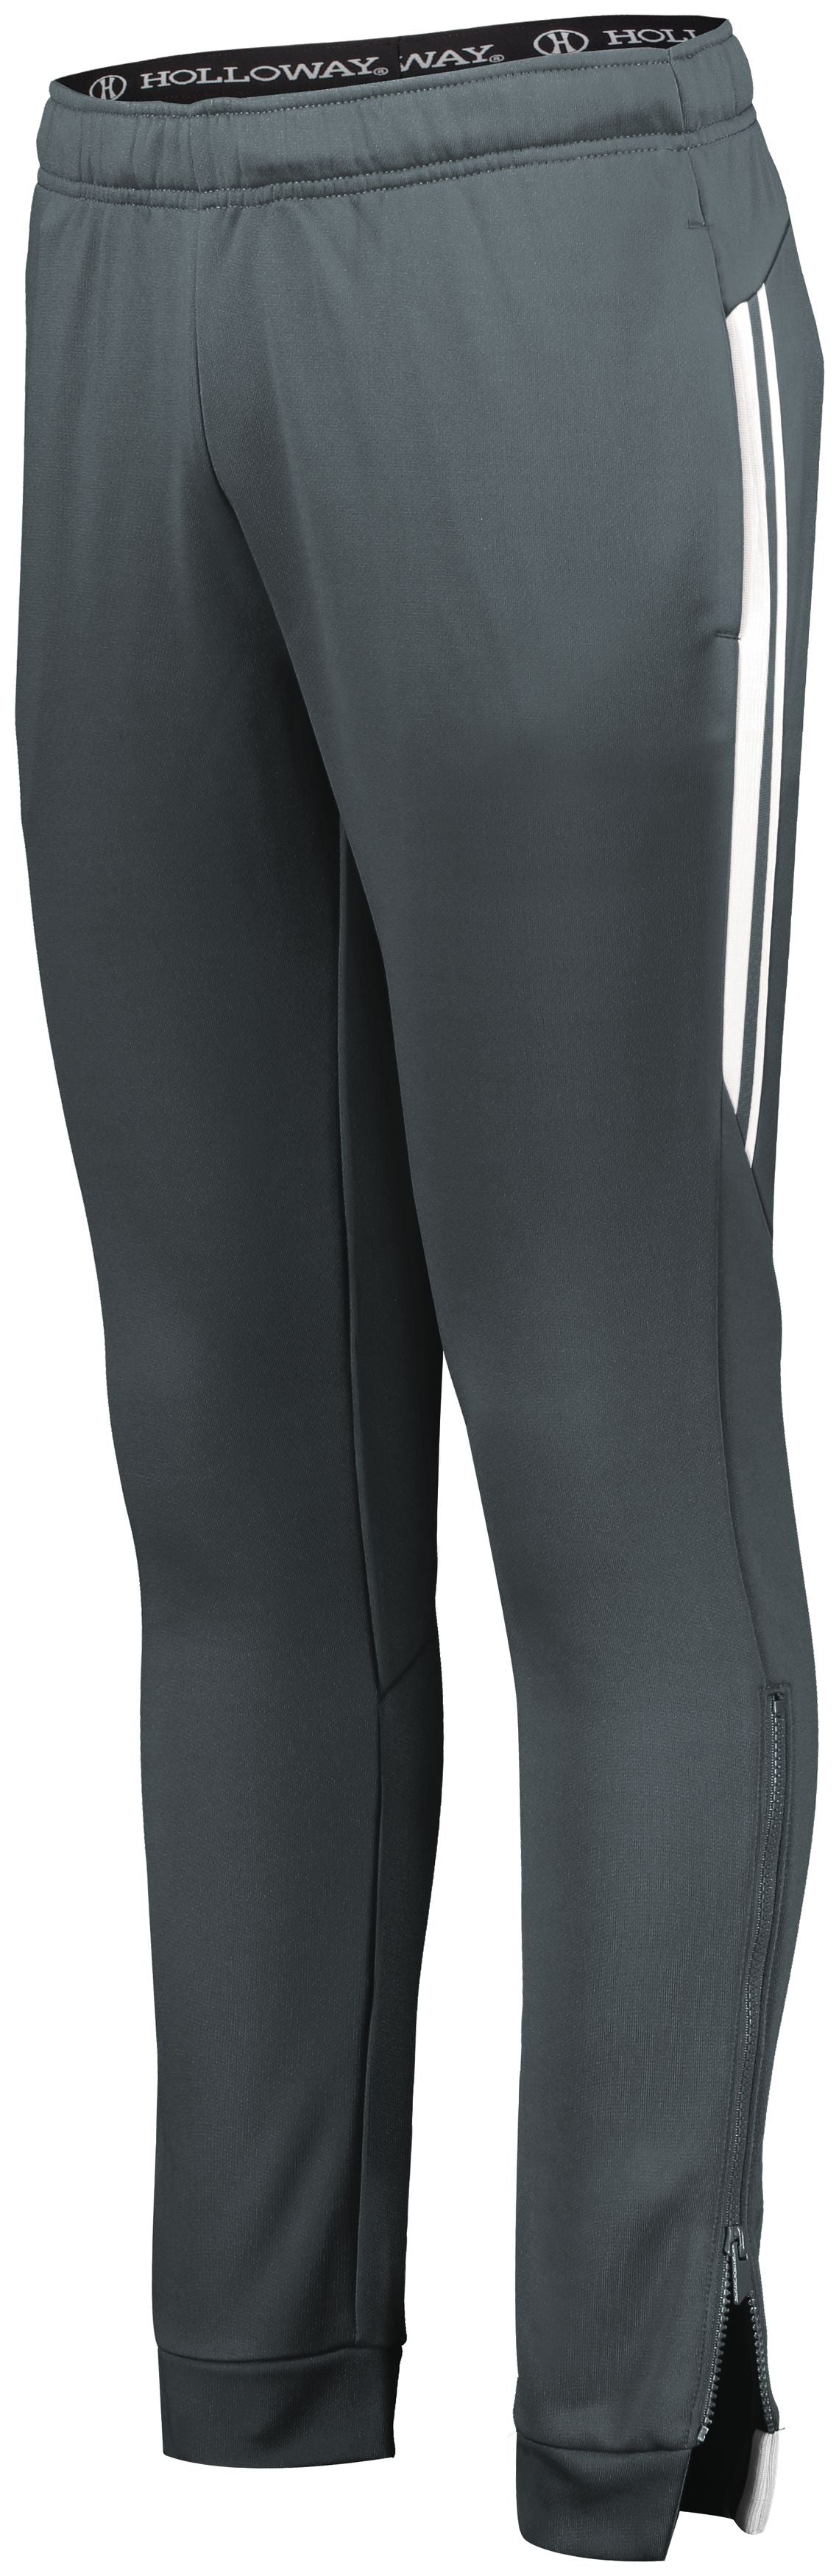 Holloway Ladies Retro Grade Pant in Graphite/White  -Part of the Ladies, Ladies-Pants, Pants, Holloway product lines at KanaleyCreations.com